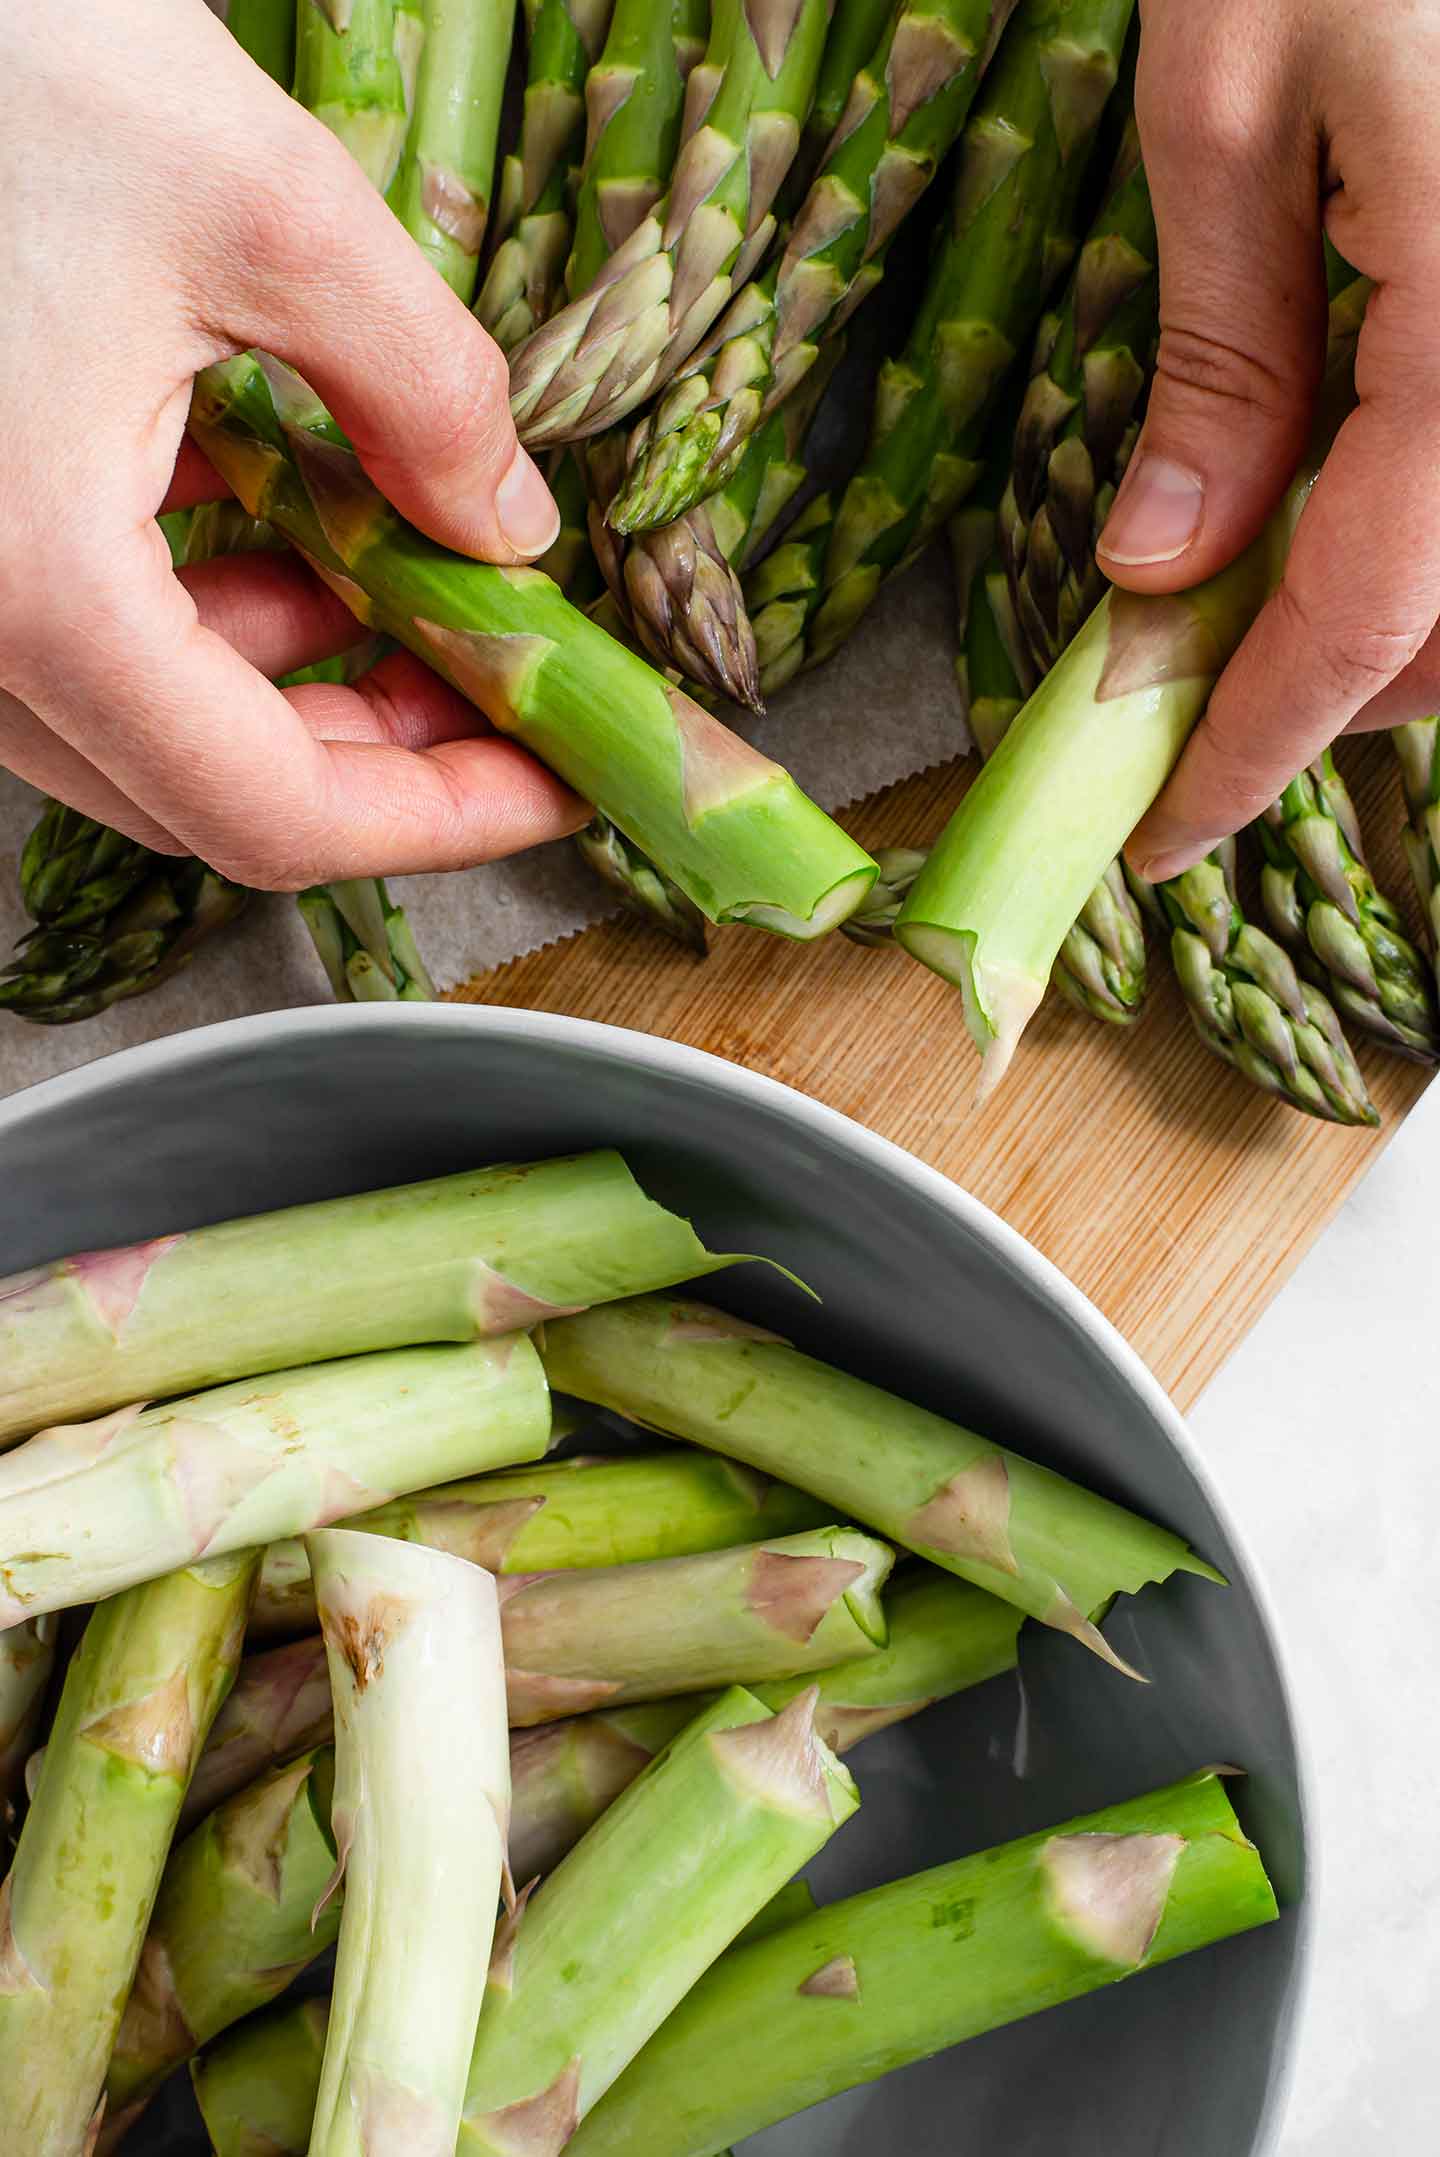 Top down view of two hands snapping a spear of asparagus. The pale, tough ends are collected in a small bowl and the fresh spears are laid on a wooden board.